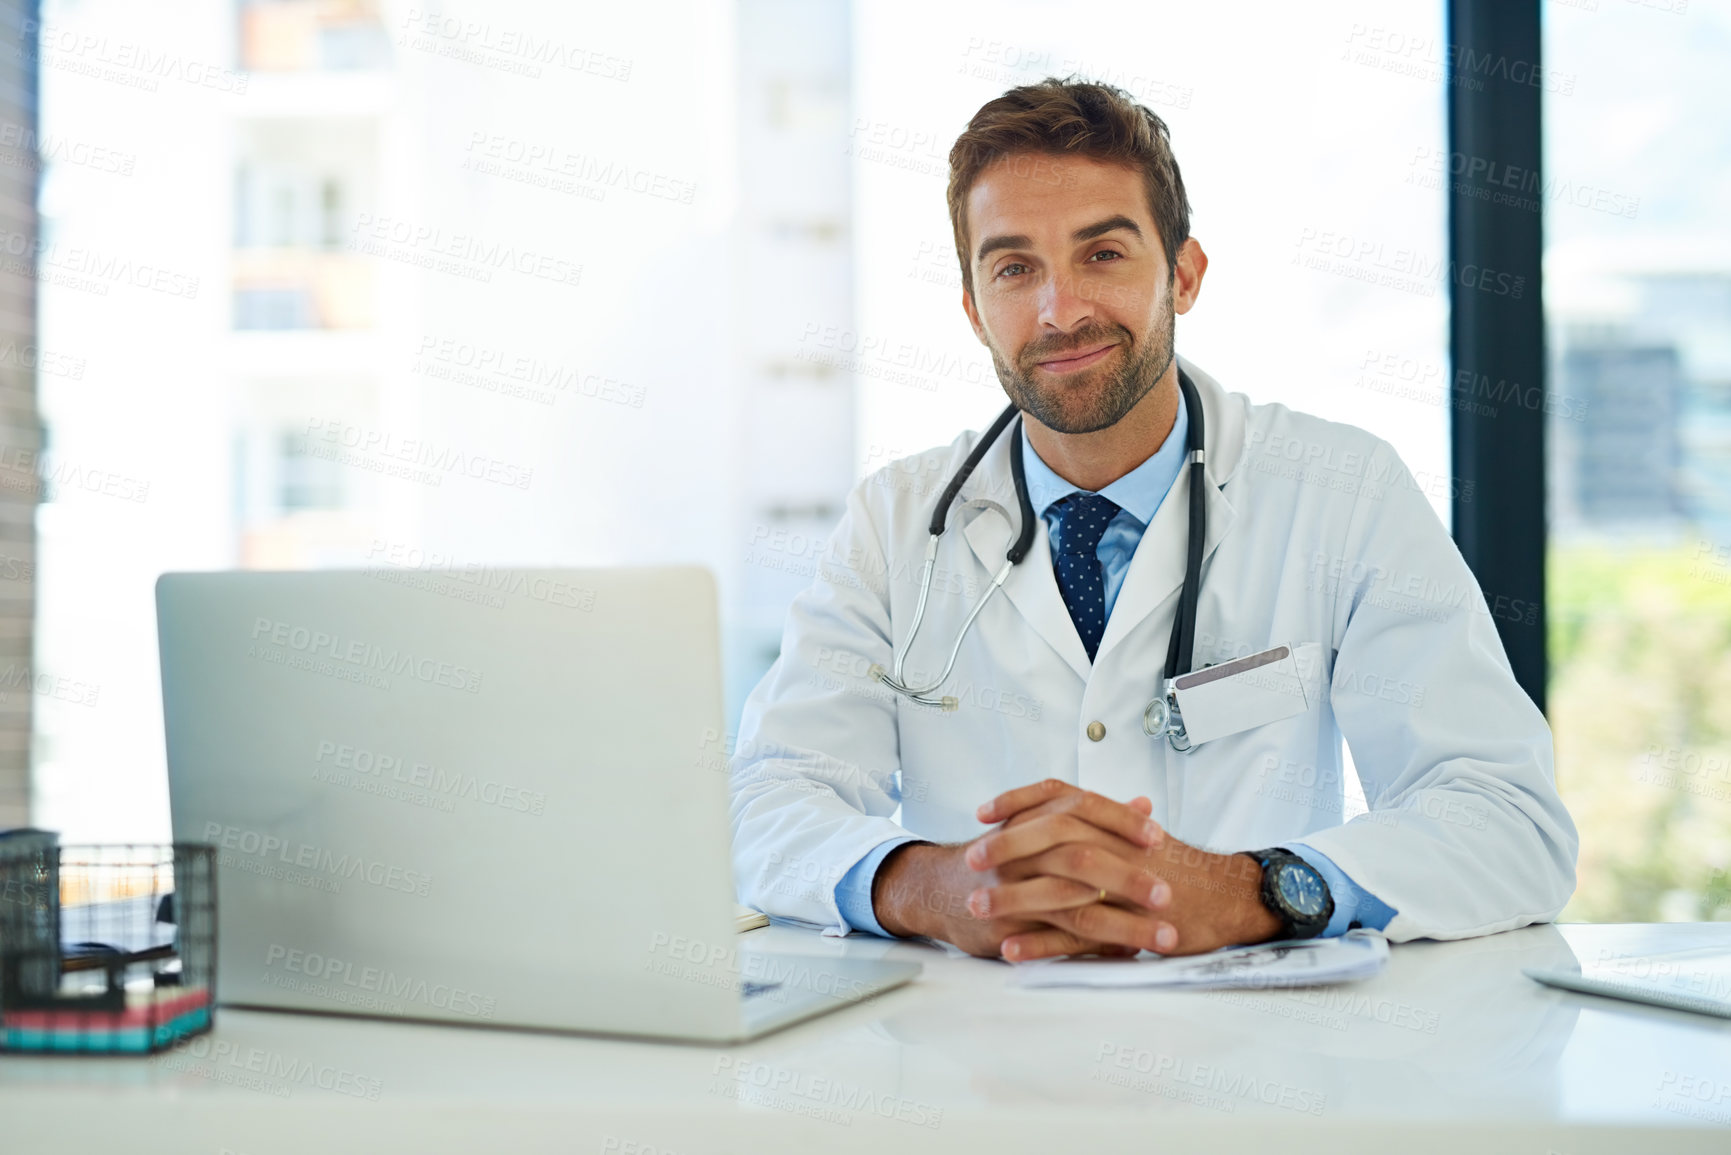 Buy stock photo Portrait of a happy doctor using his laptop while sitting at his desk